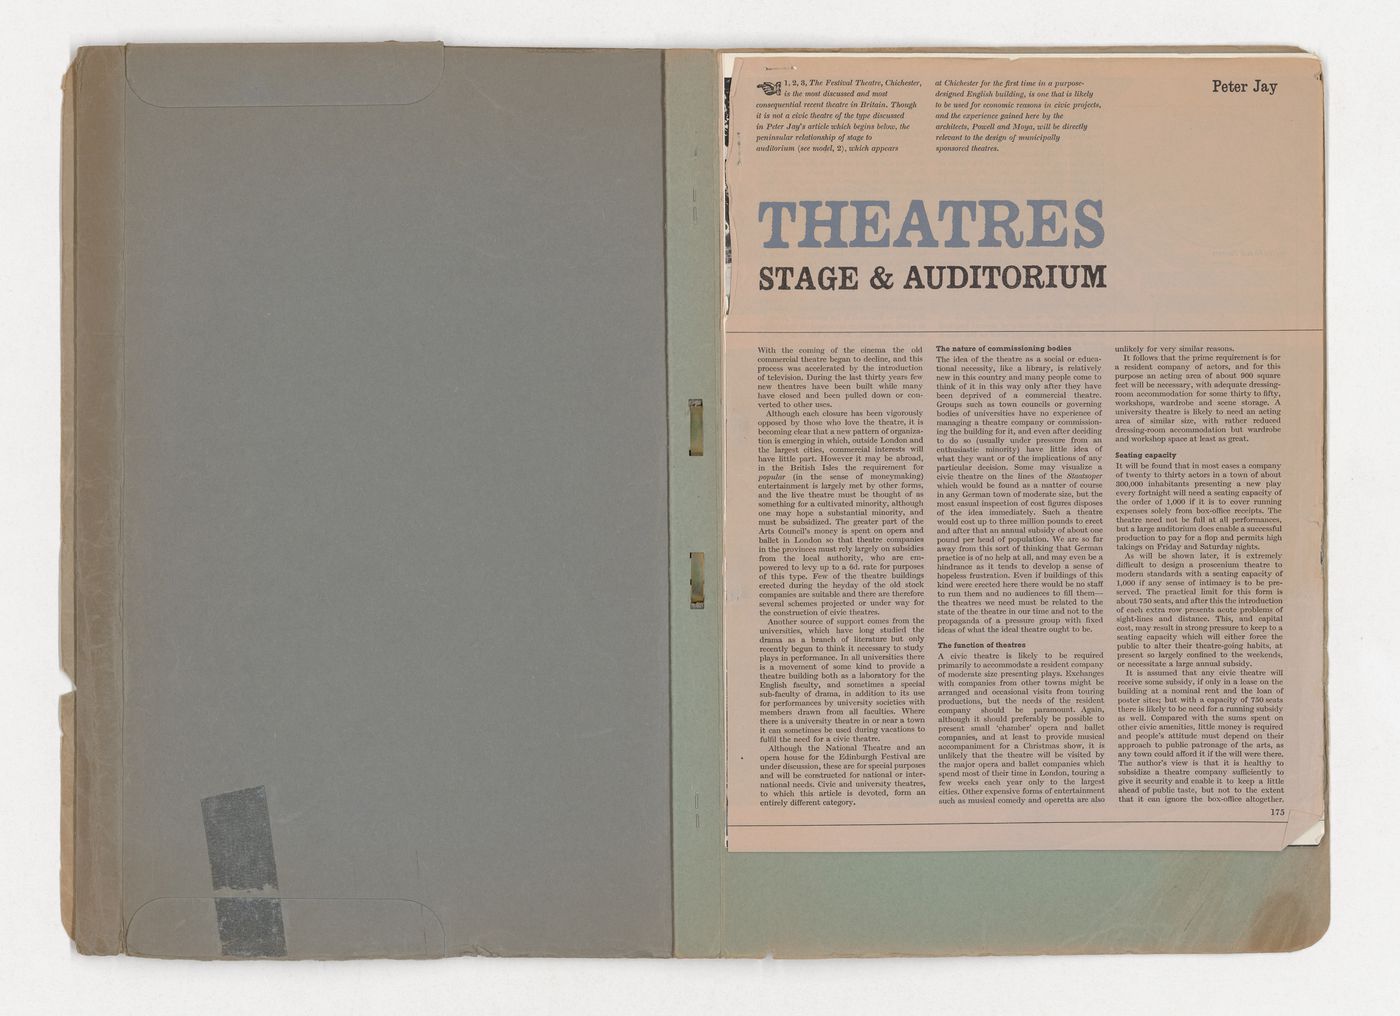 Folder with names, addresses, and phone numbers of people and companies involved with the Fun Palace Project and a copy of the article "Theatres, stage & auditorium" by Peter Jay